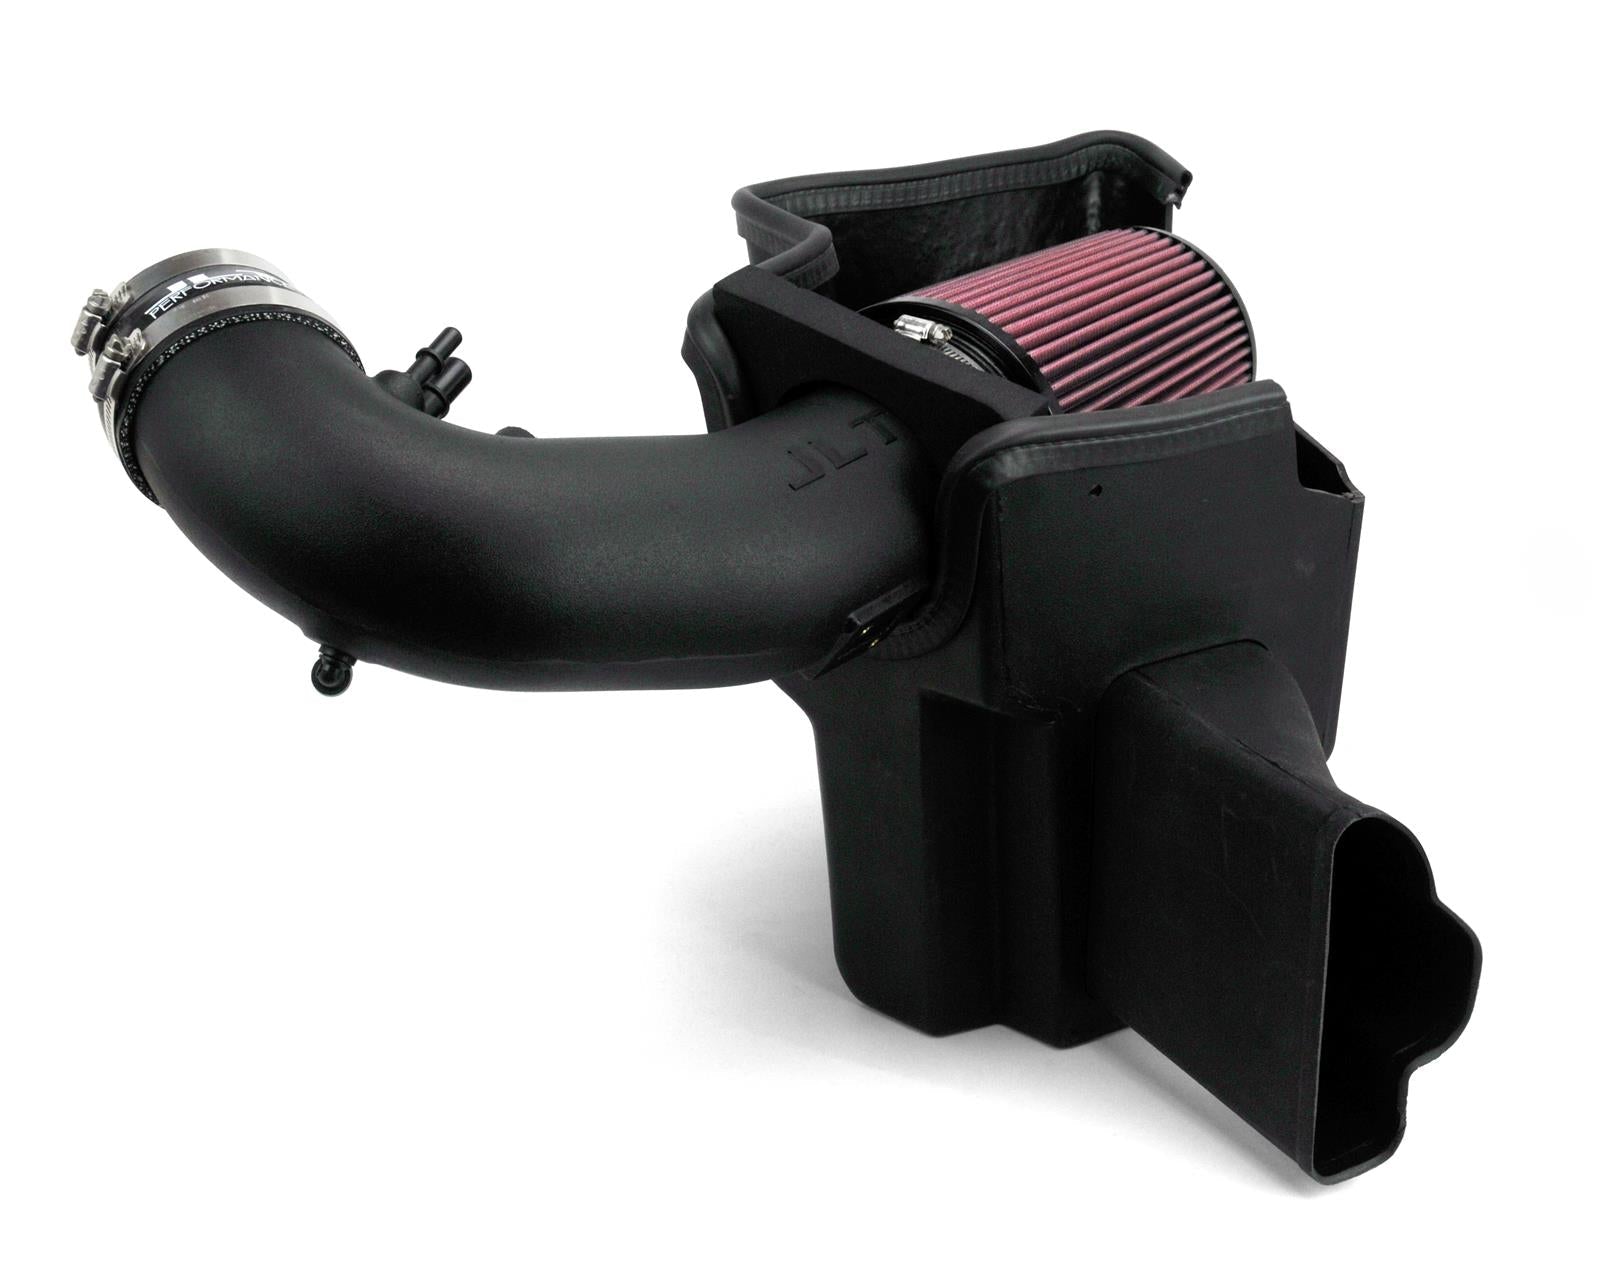 Cold Air Intake for Ford Mustang 2015-17 Manufactured by JLT | Part #CAI-FMG-15 - Available from NEMESISUK.COM